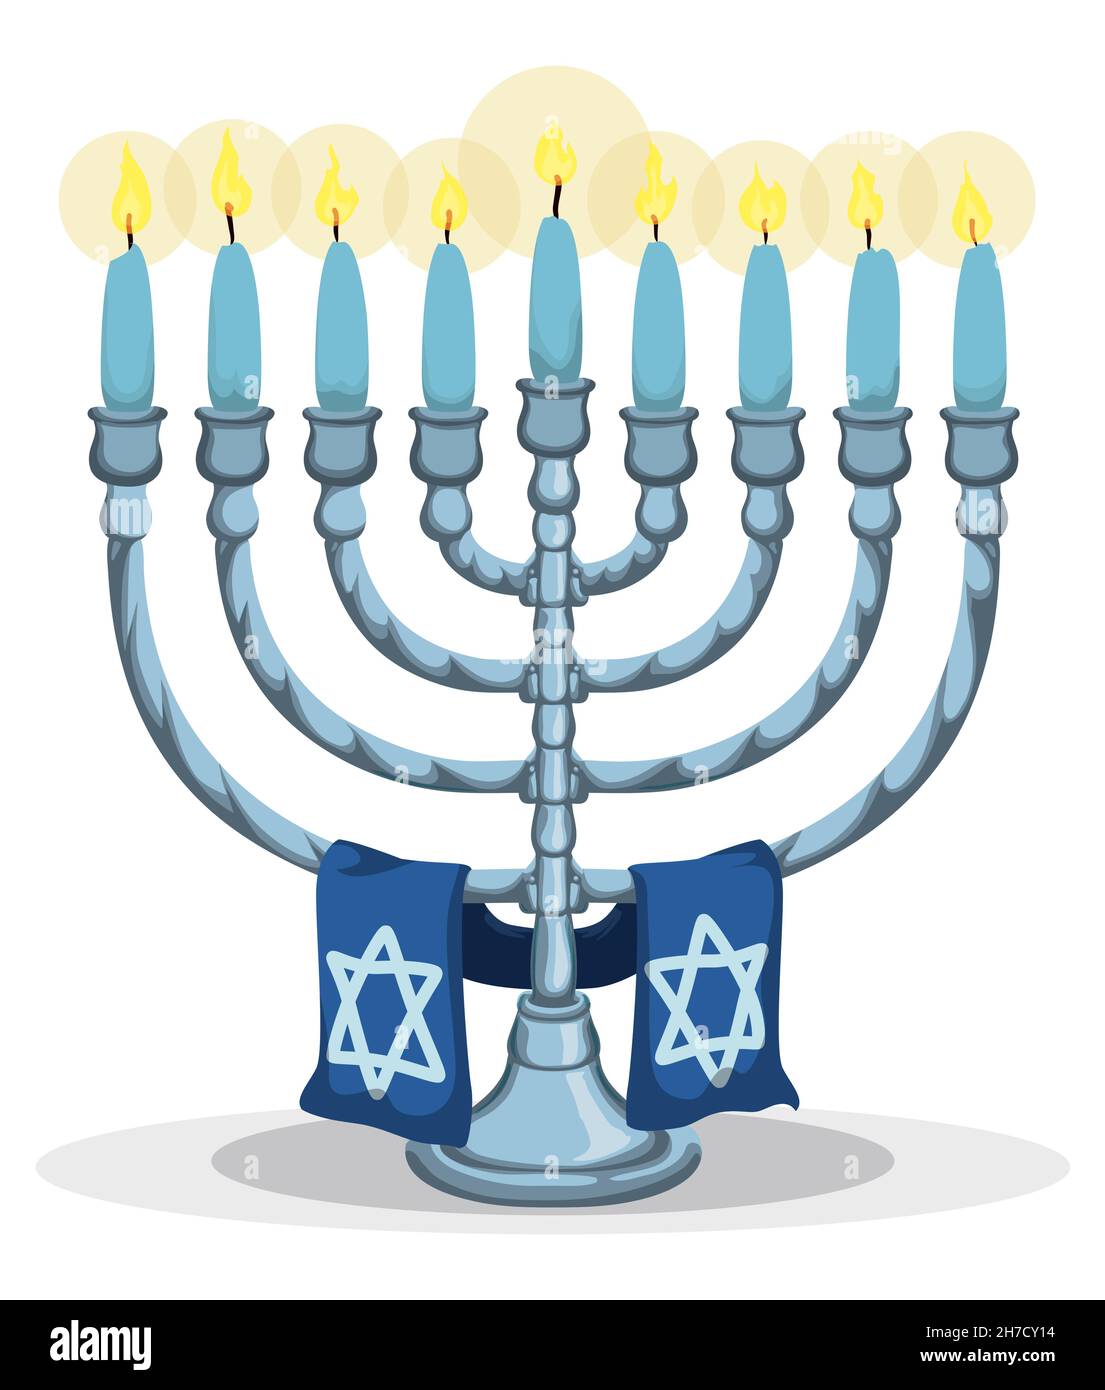 Solemn view of lighted Chanukiah, decorated with a blue scarf in it with Stars of David, ready for Hanukkah celebration. Stock Vector